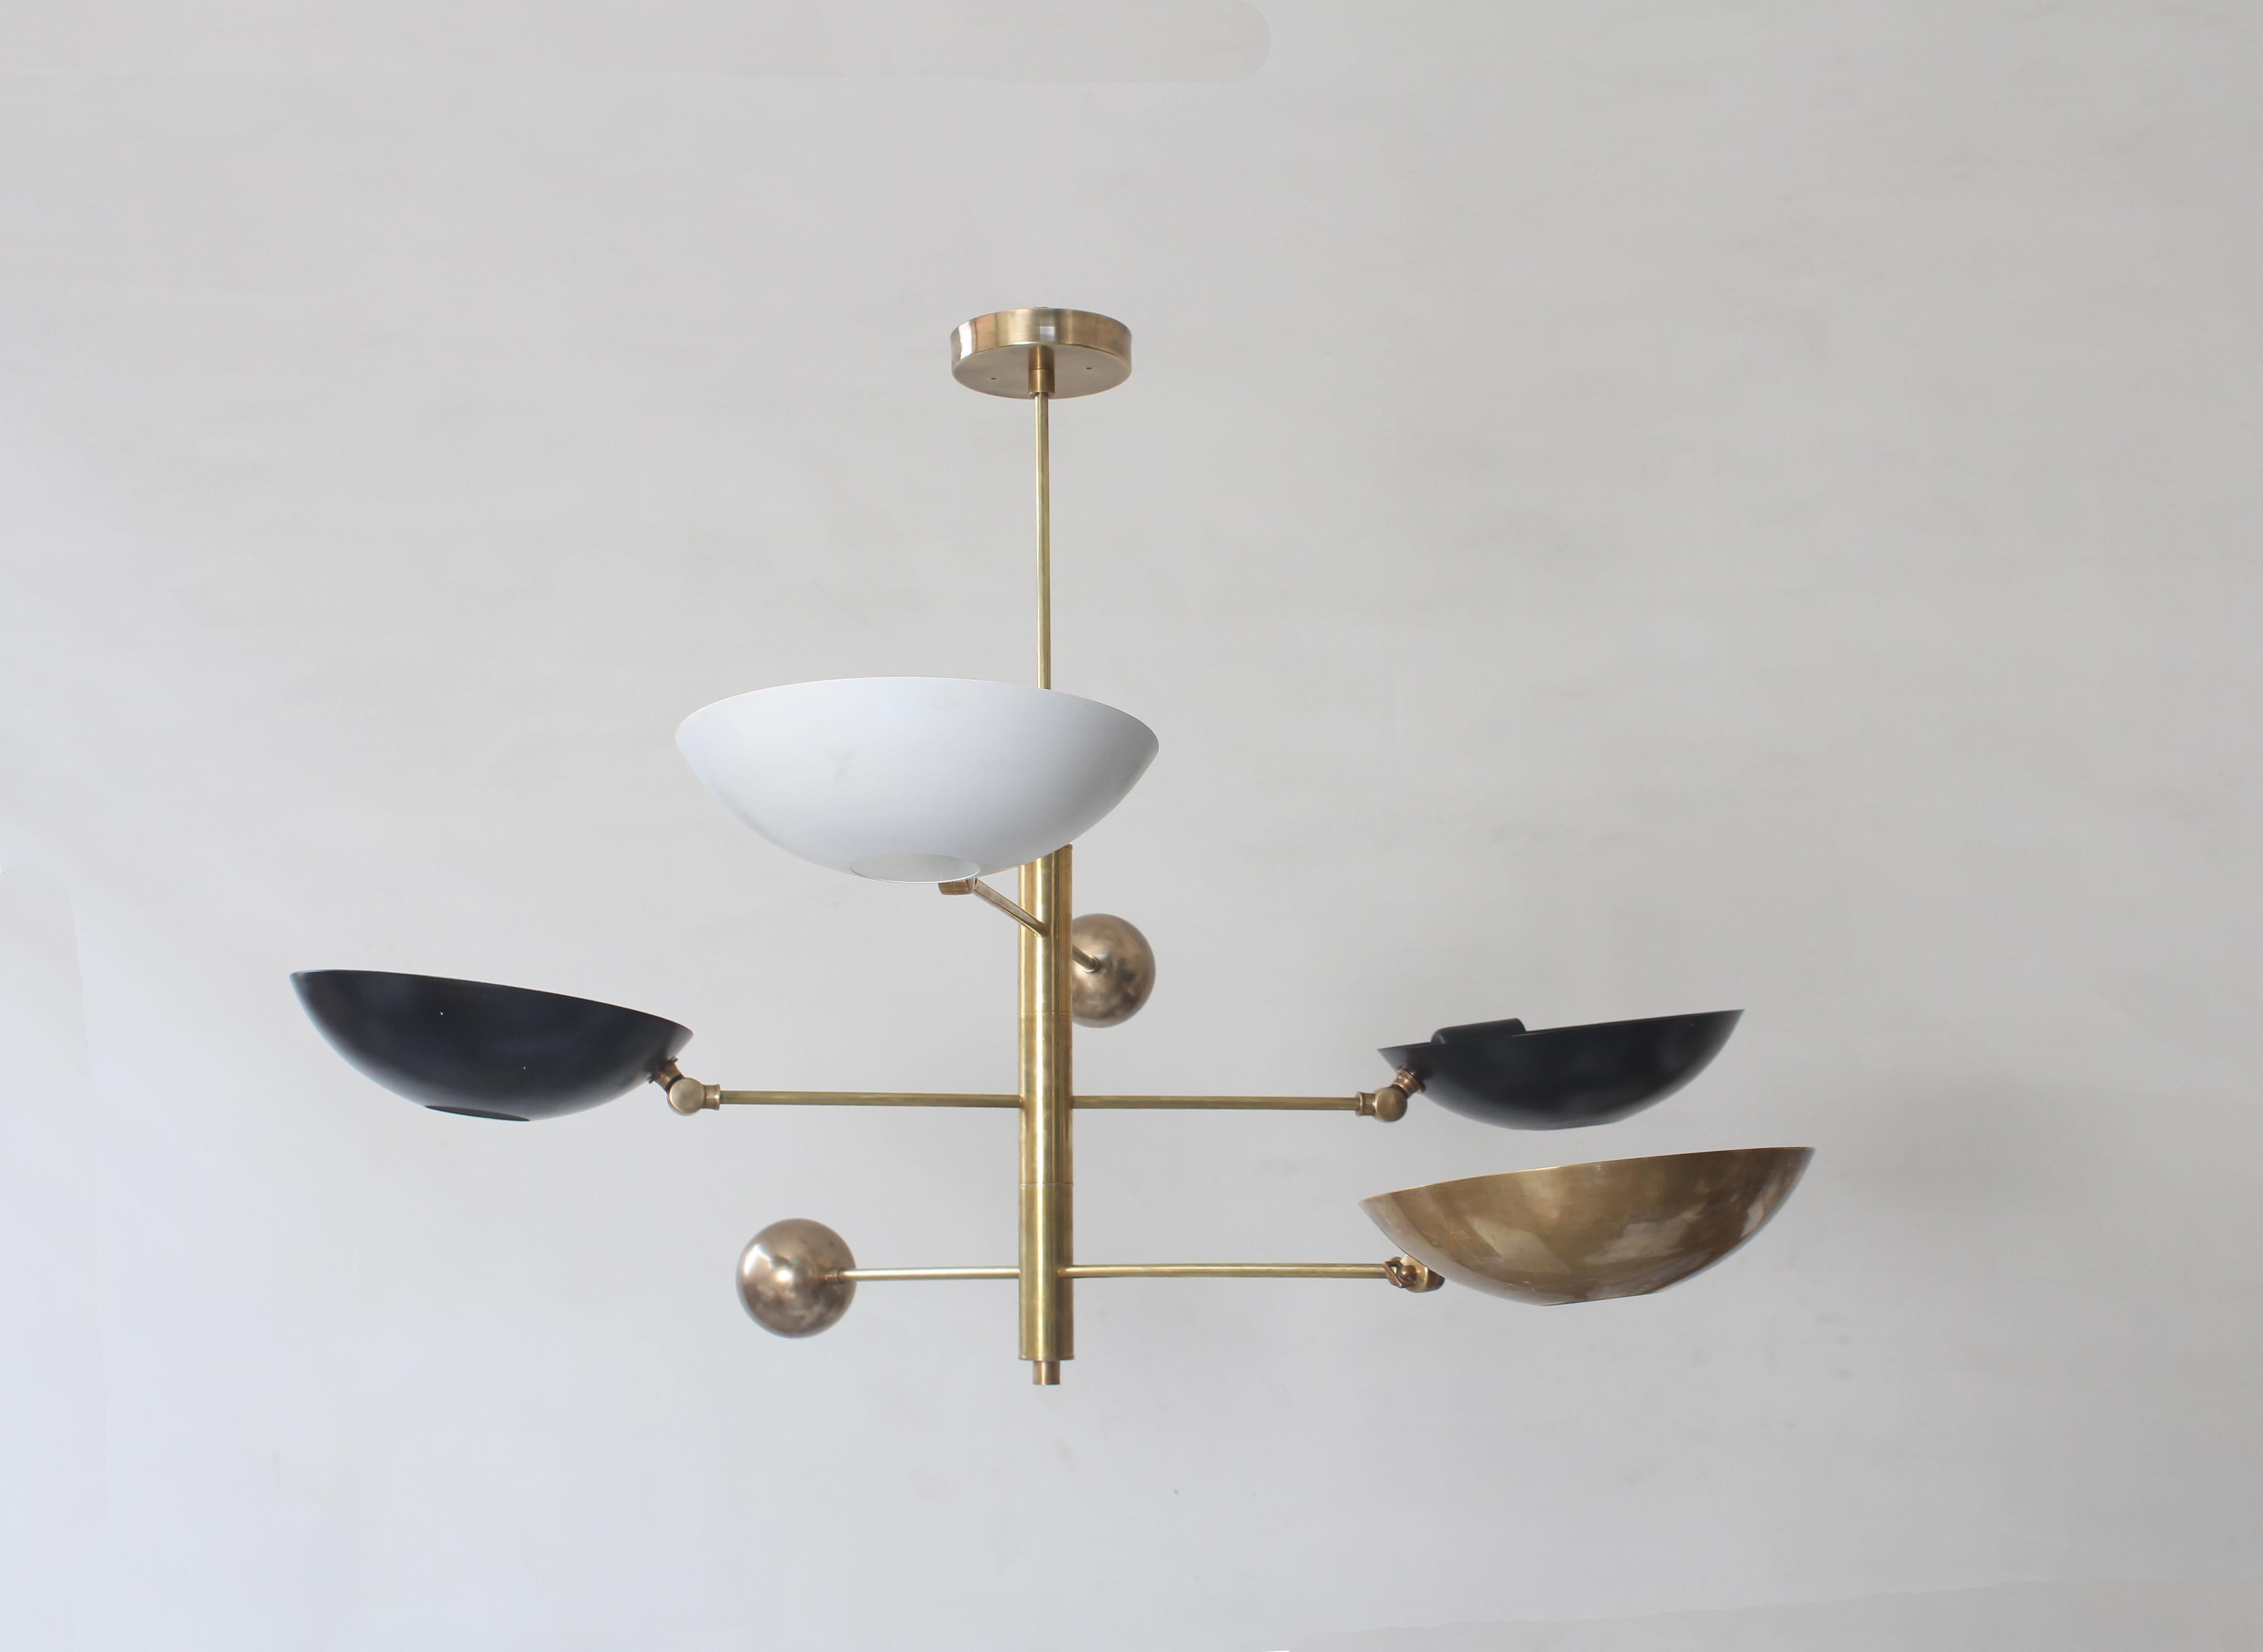 Elegant minimalist chandelier with  counter balanced  rotating arm that pivot 180 degree with  tiltable shade .

Light bounce on ceiling  creating an ambient mood  and lights  up a few thing under throught the hole in  shade . 

Shade displayed here